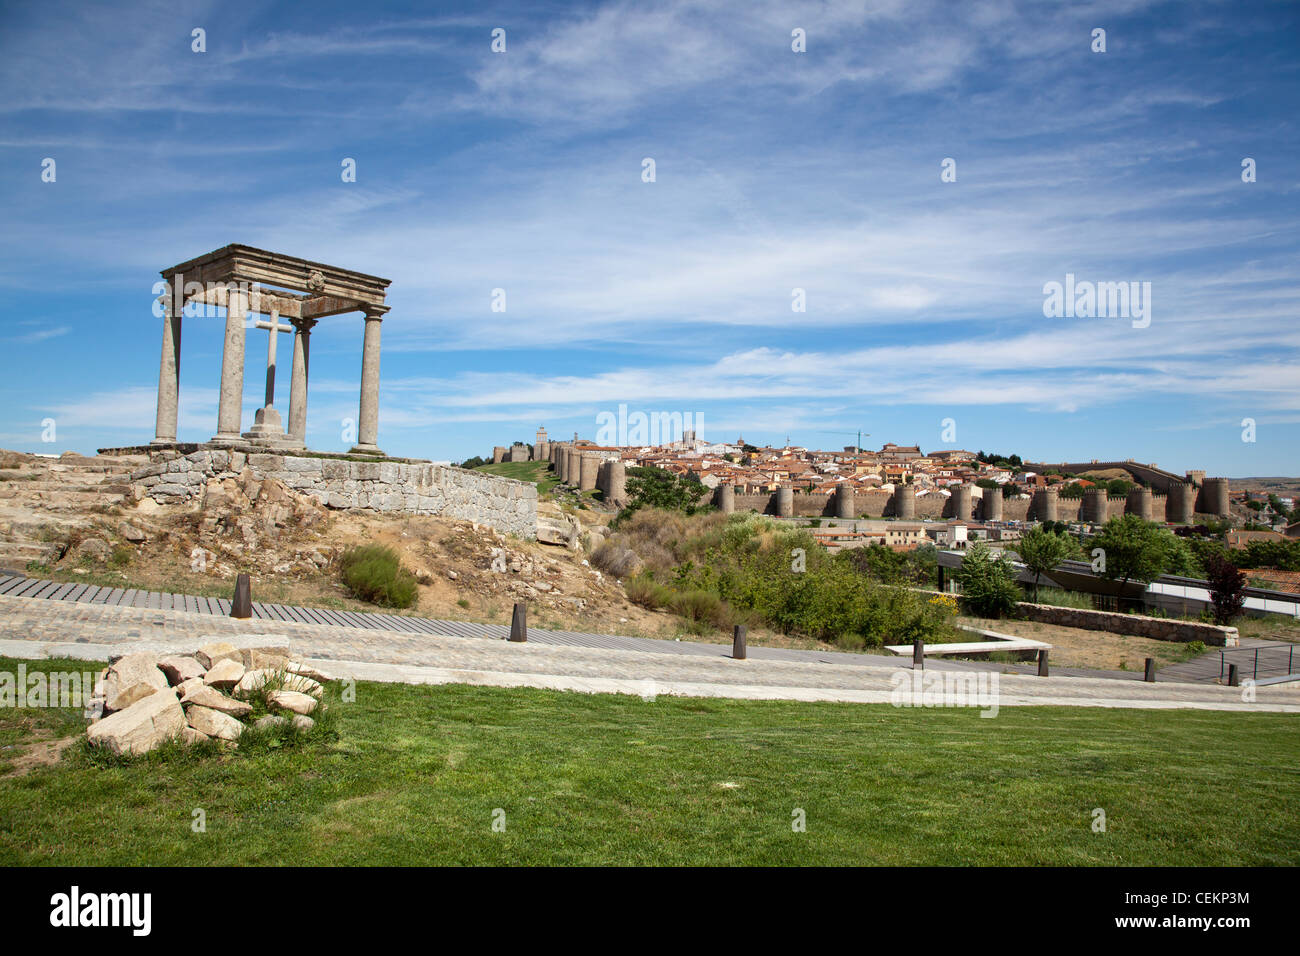 Spain, Castile and Leon, Avila, View of the Old Town and The Four Posts (Los Cuatro Postes) Stock Photo